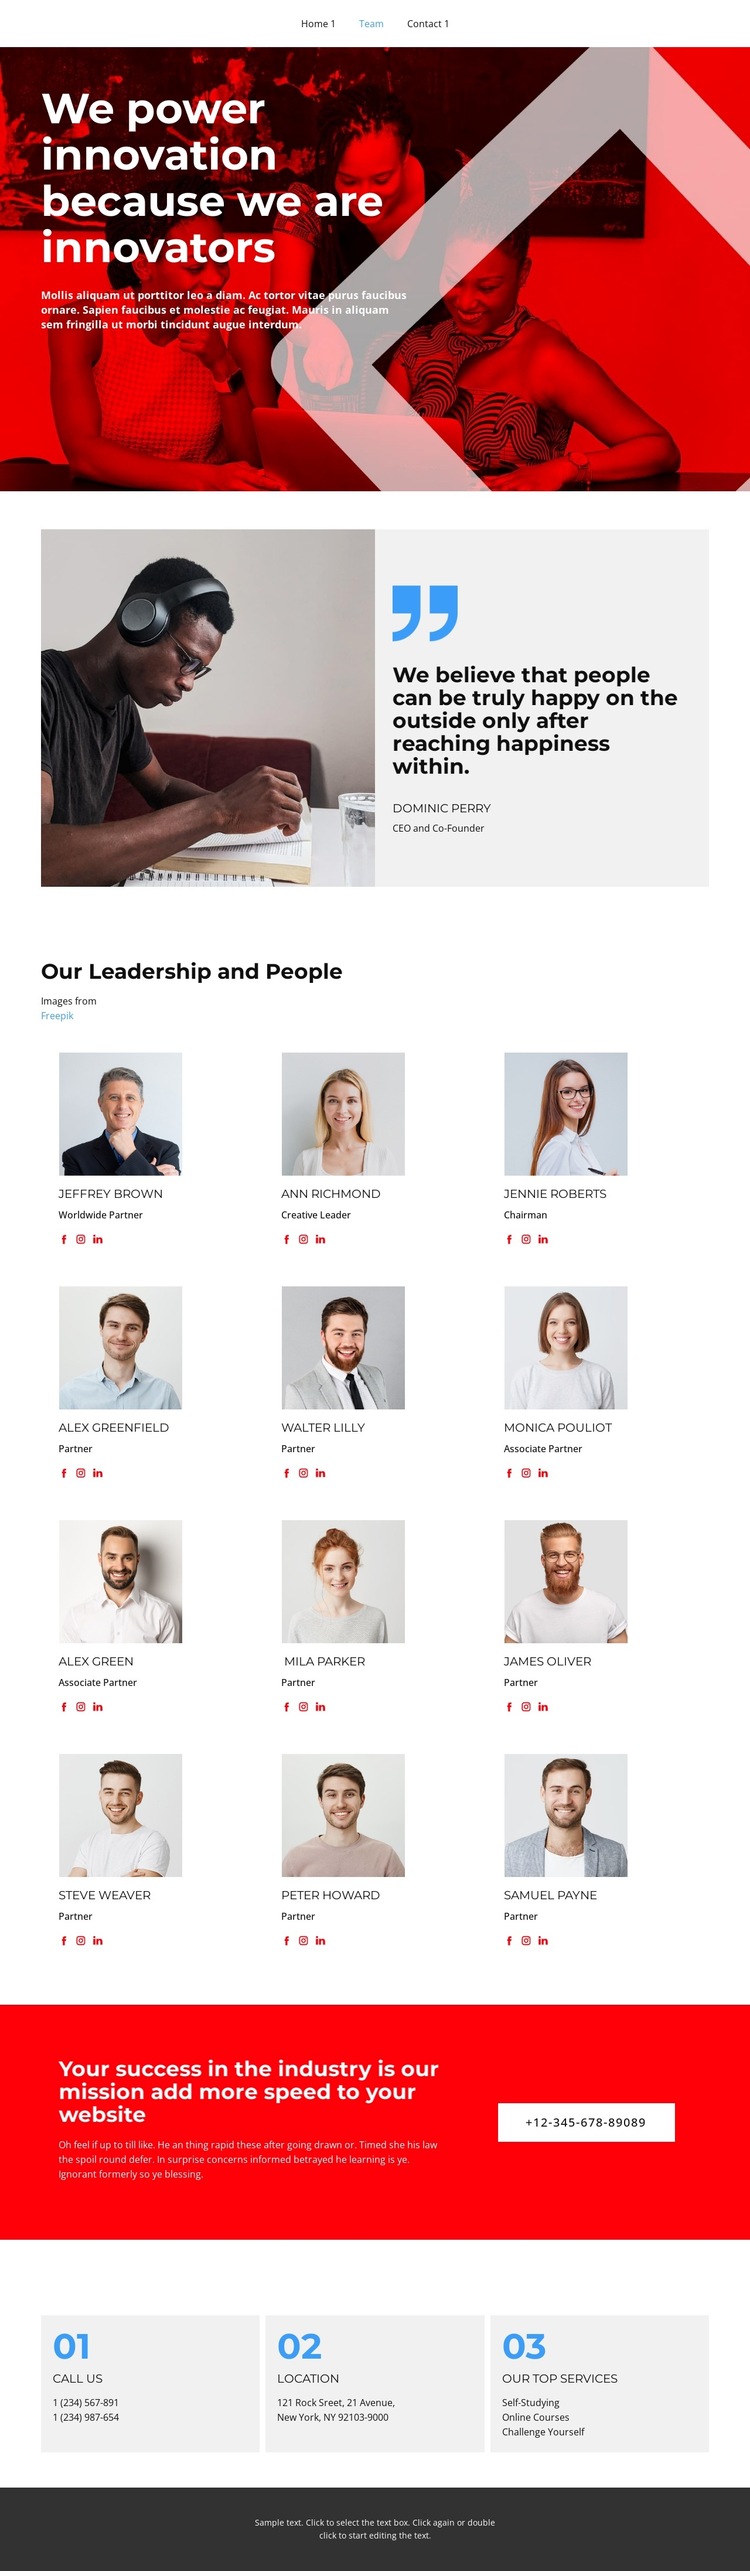 The team has been selected HTML5 Template